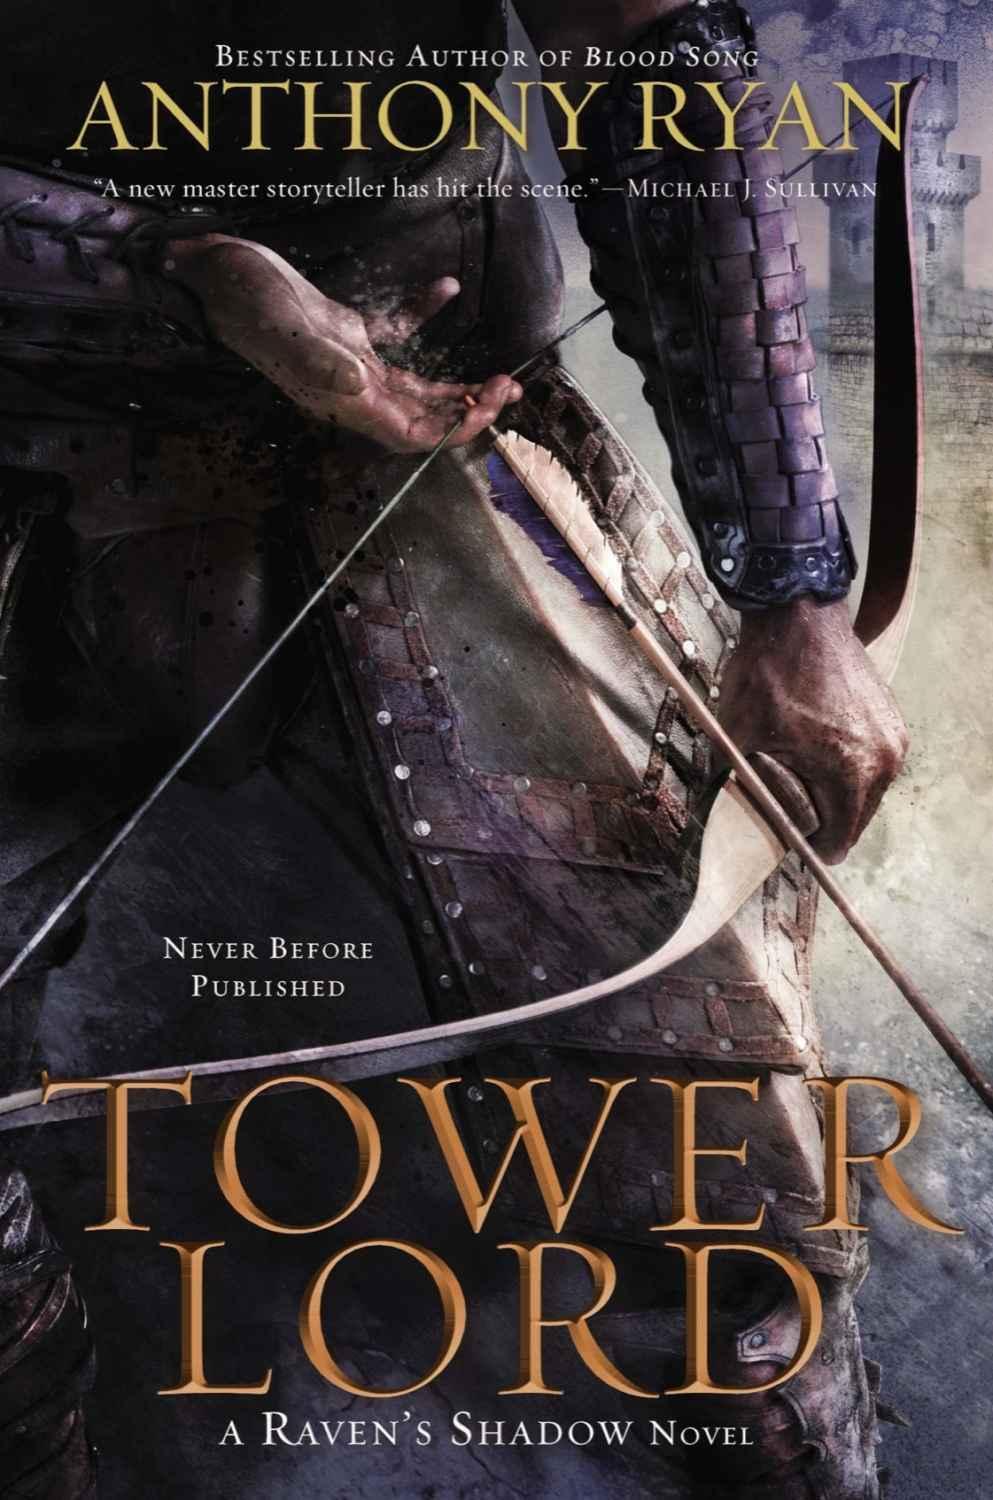 Ravens Shadow 02 - Tower Lord by Anthony  Ryan